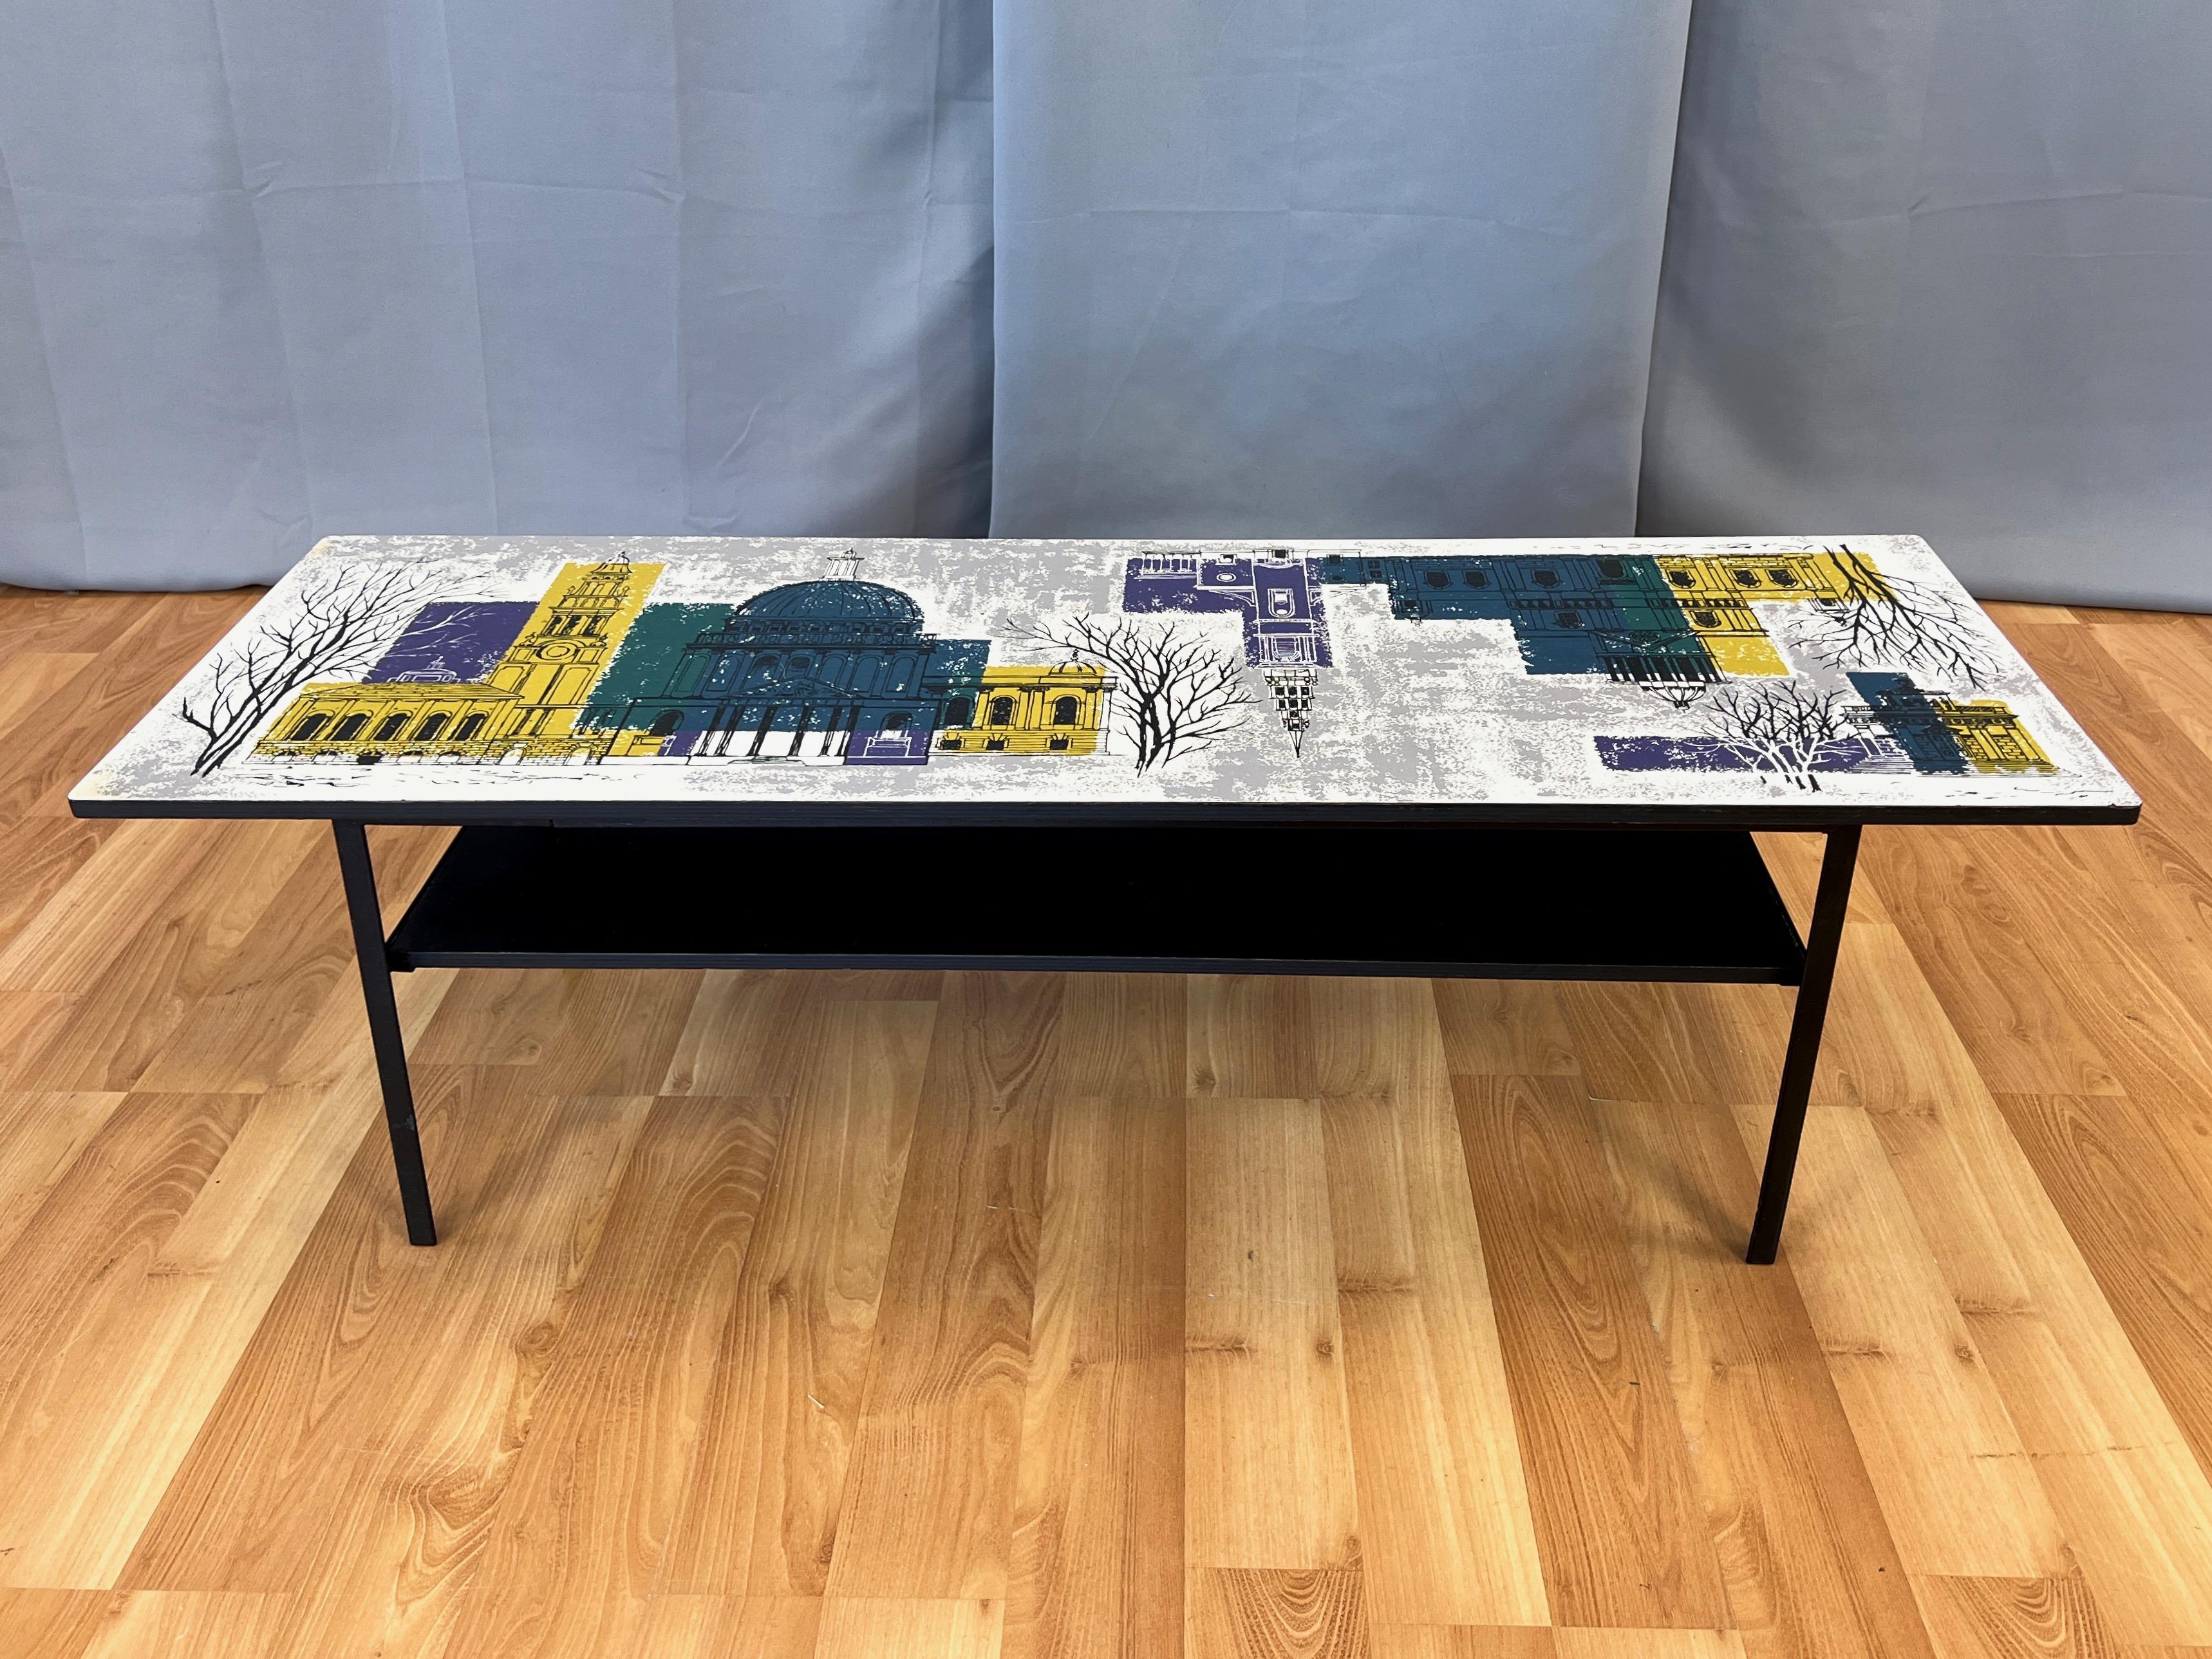 Painted John Piper London Skyline Coffee Table by Myer for Conran and Heal’s, c. 1960 For Sale